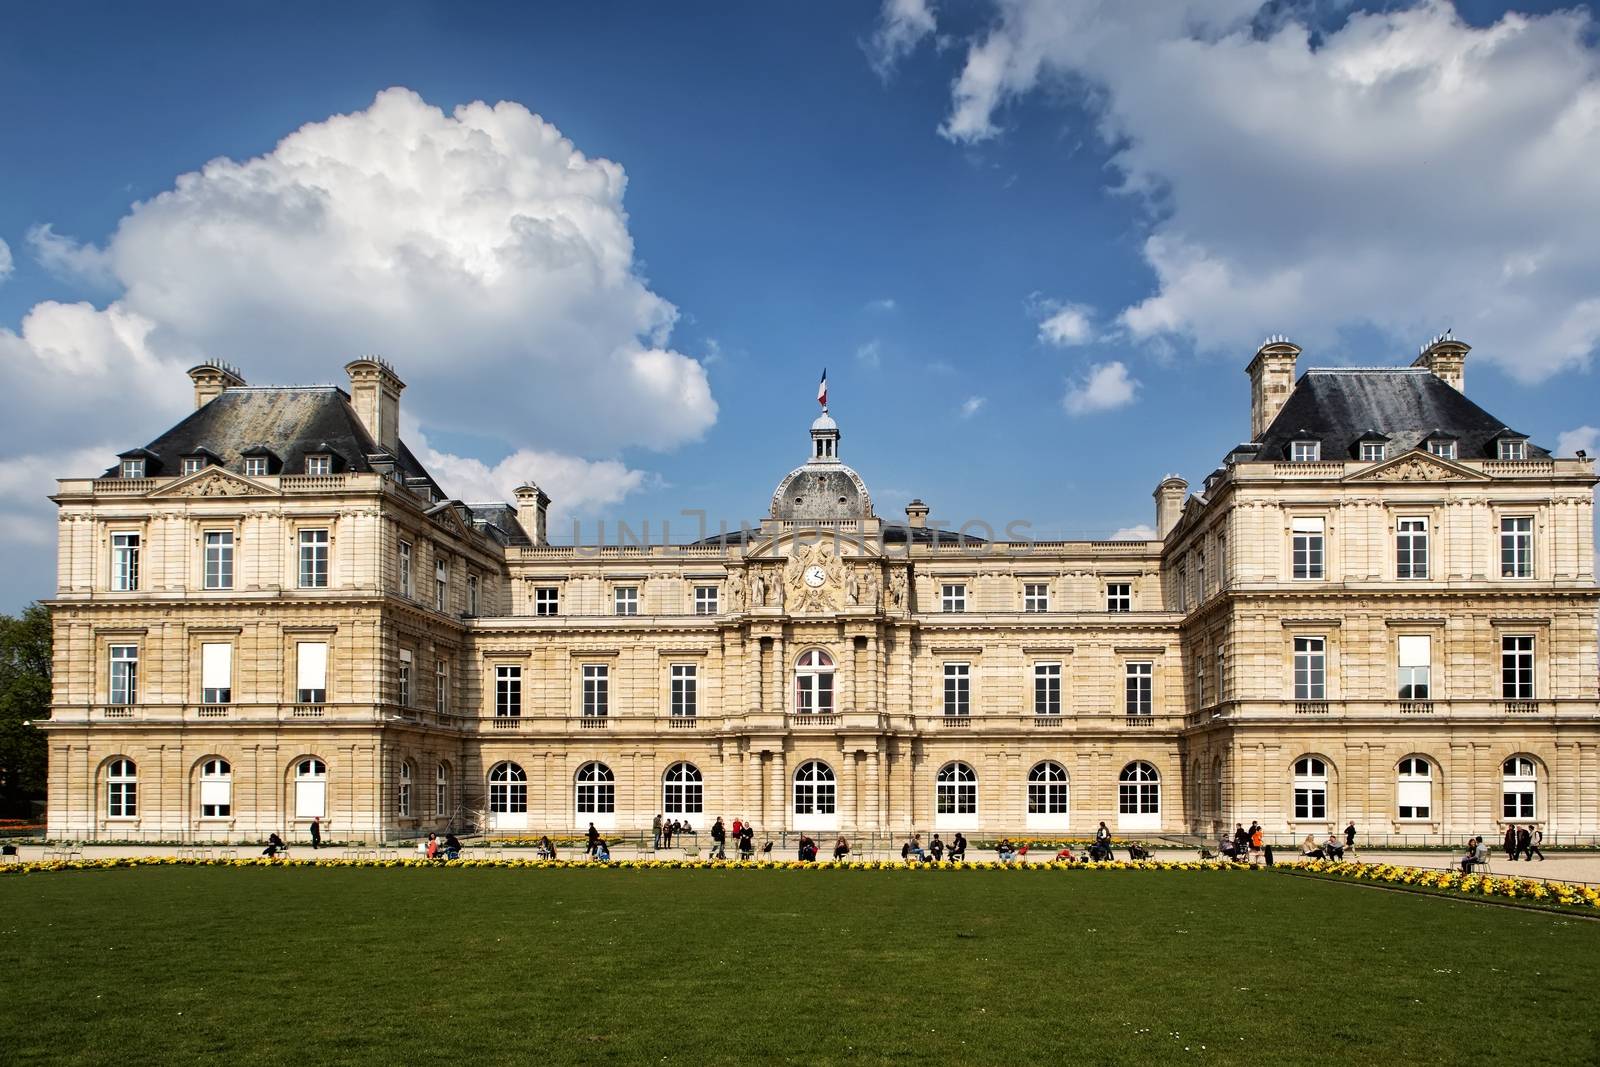 Luxemburg Palace in Paris, France by mitakag